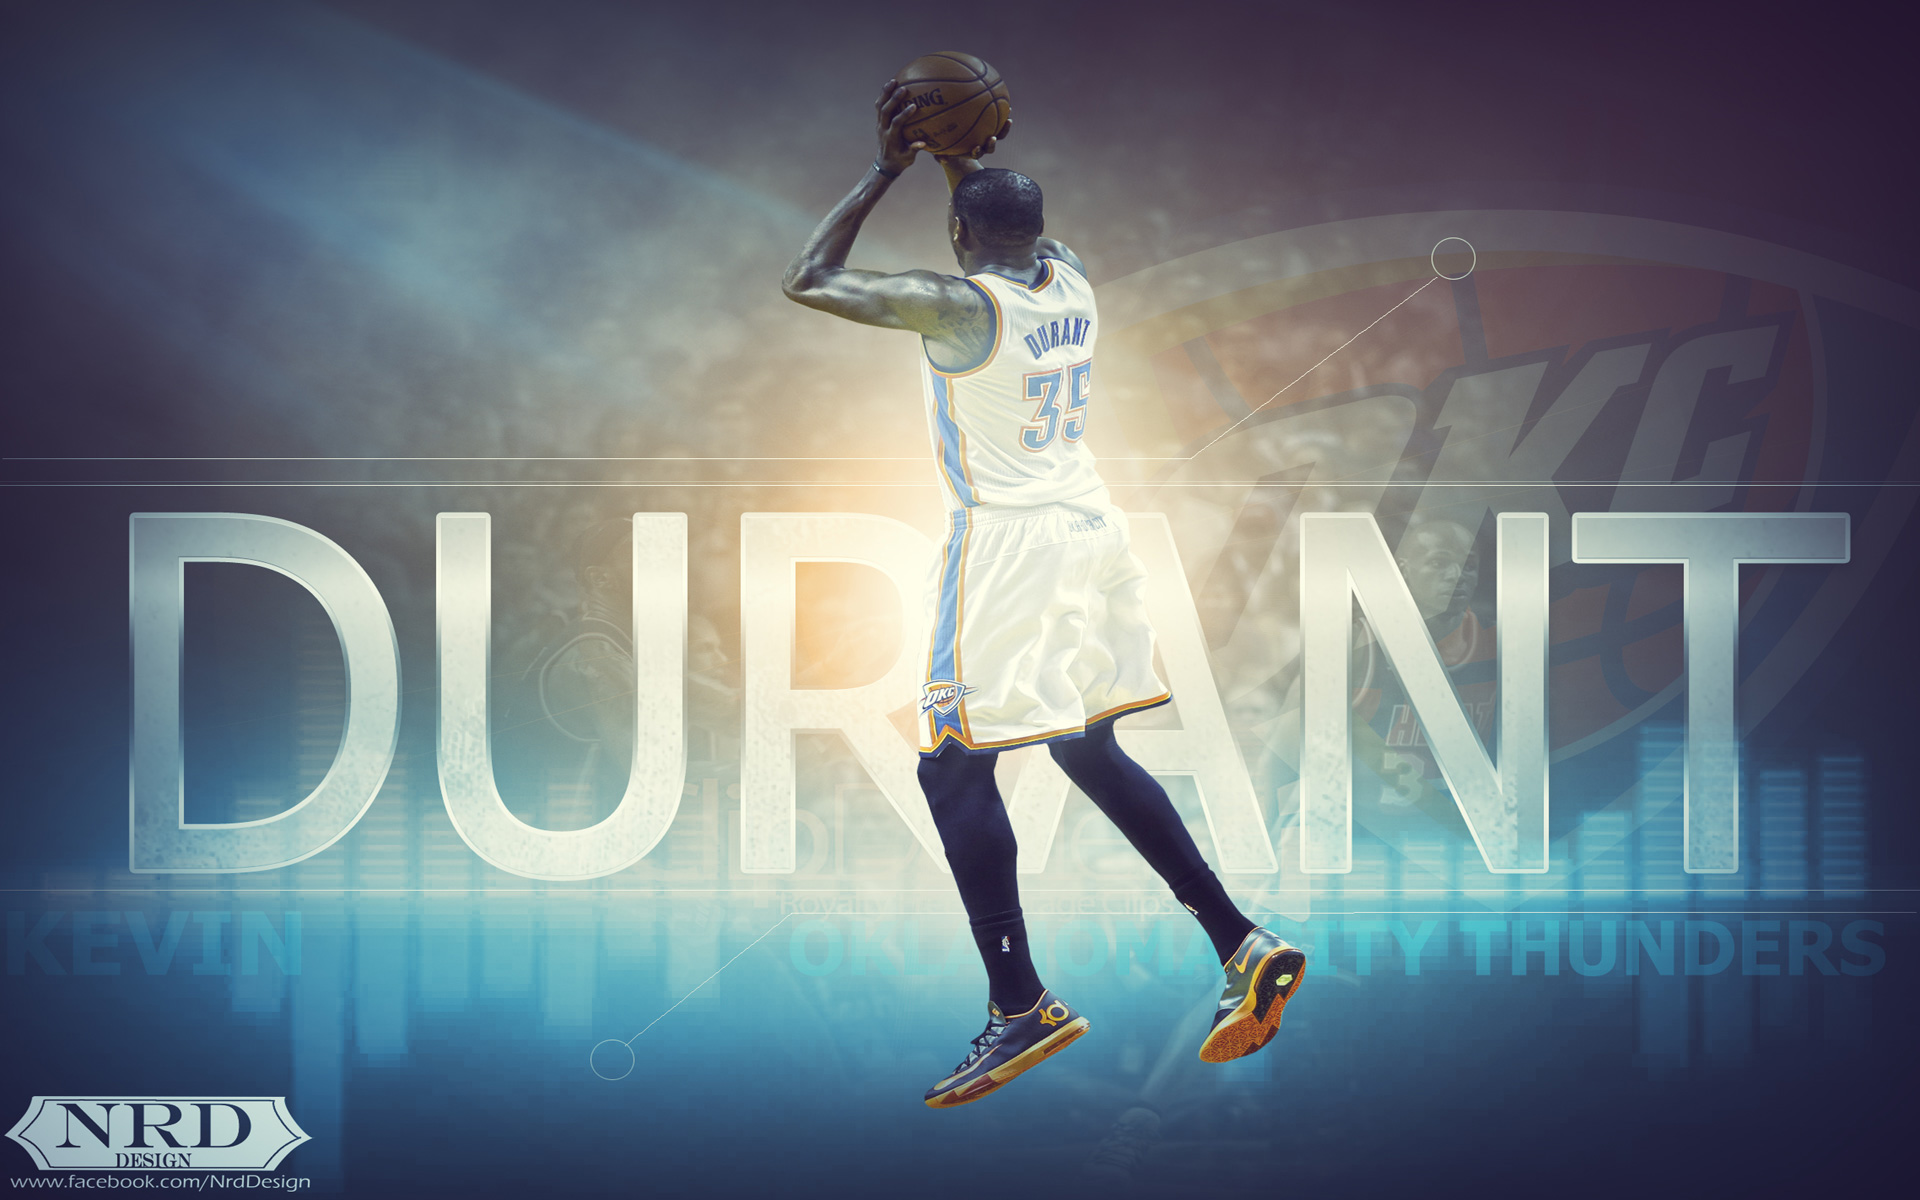 Kevin Durant phone wallpaper 1080P 2k 4k Full HD Wallpapers Backgrounds  Free Download  Wallpaper Crafter